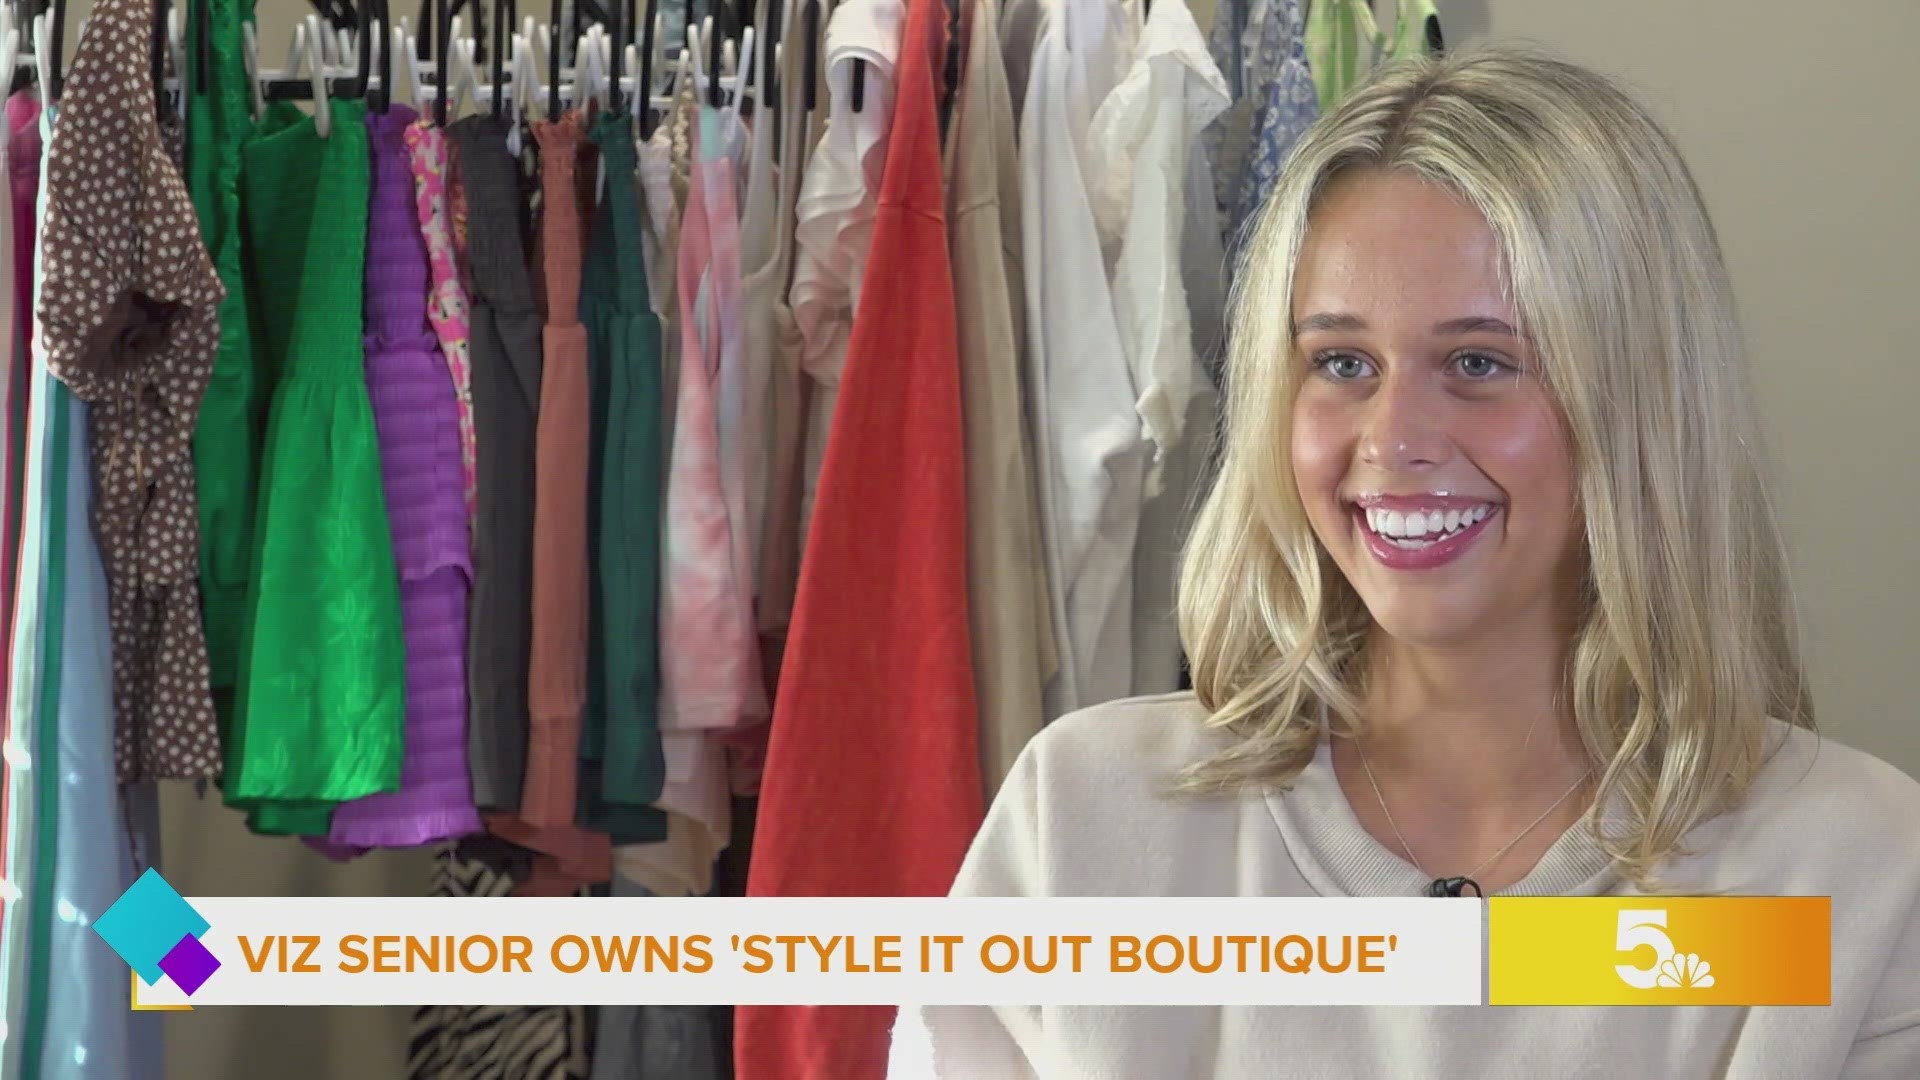 Style It Out Boutique is a high fashion clothing boutique for young women by 18-year-old Emma Miller.